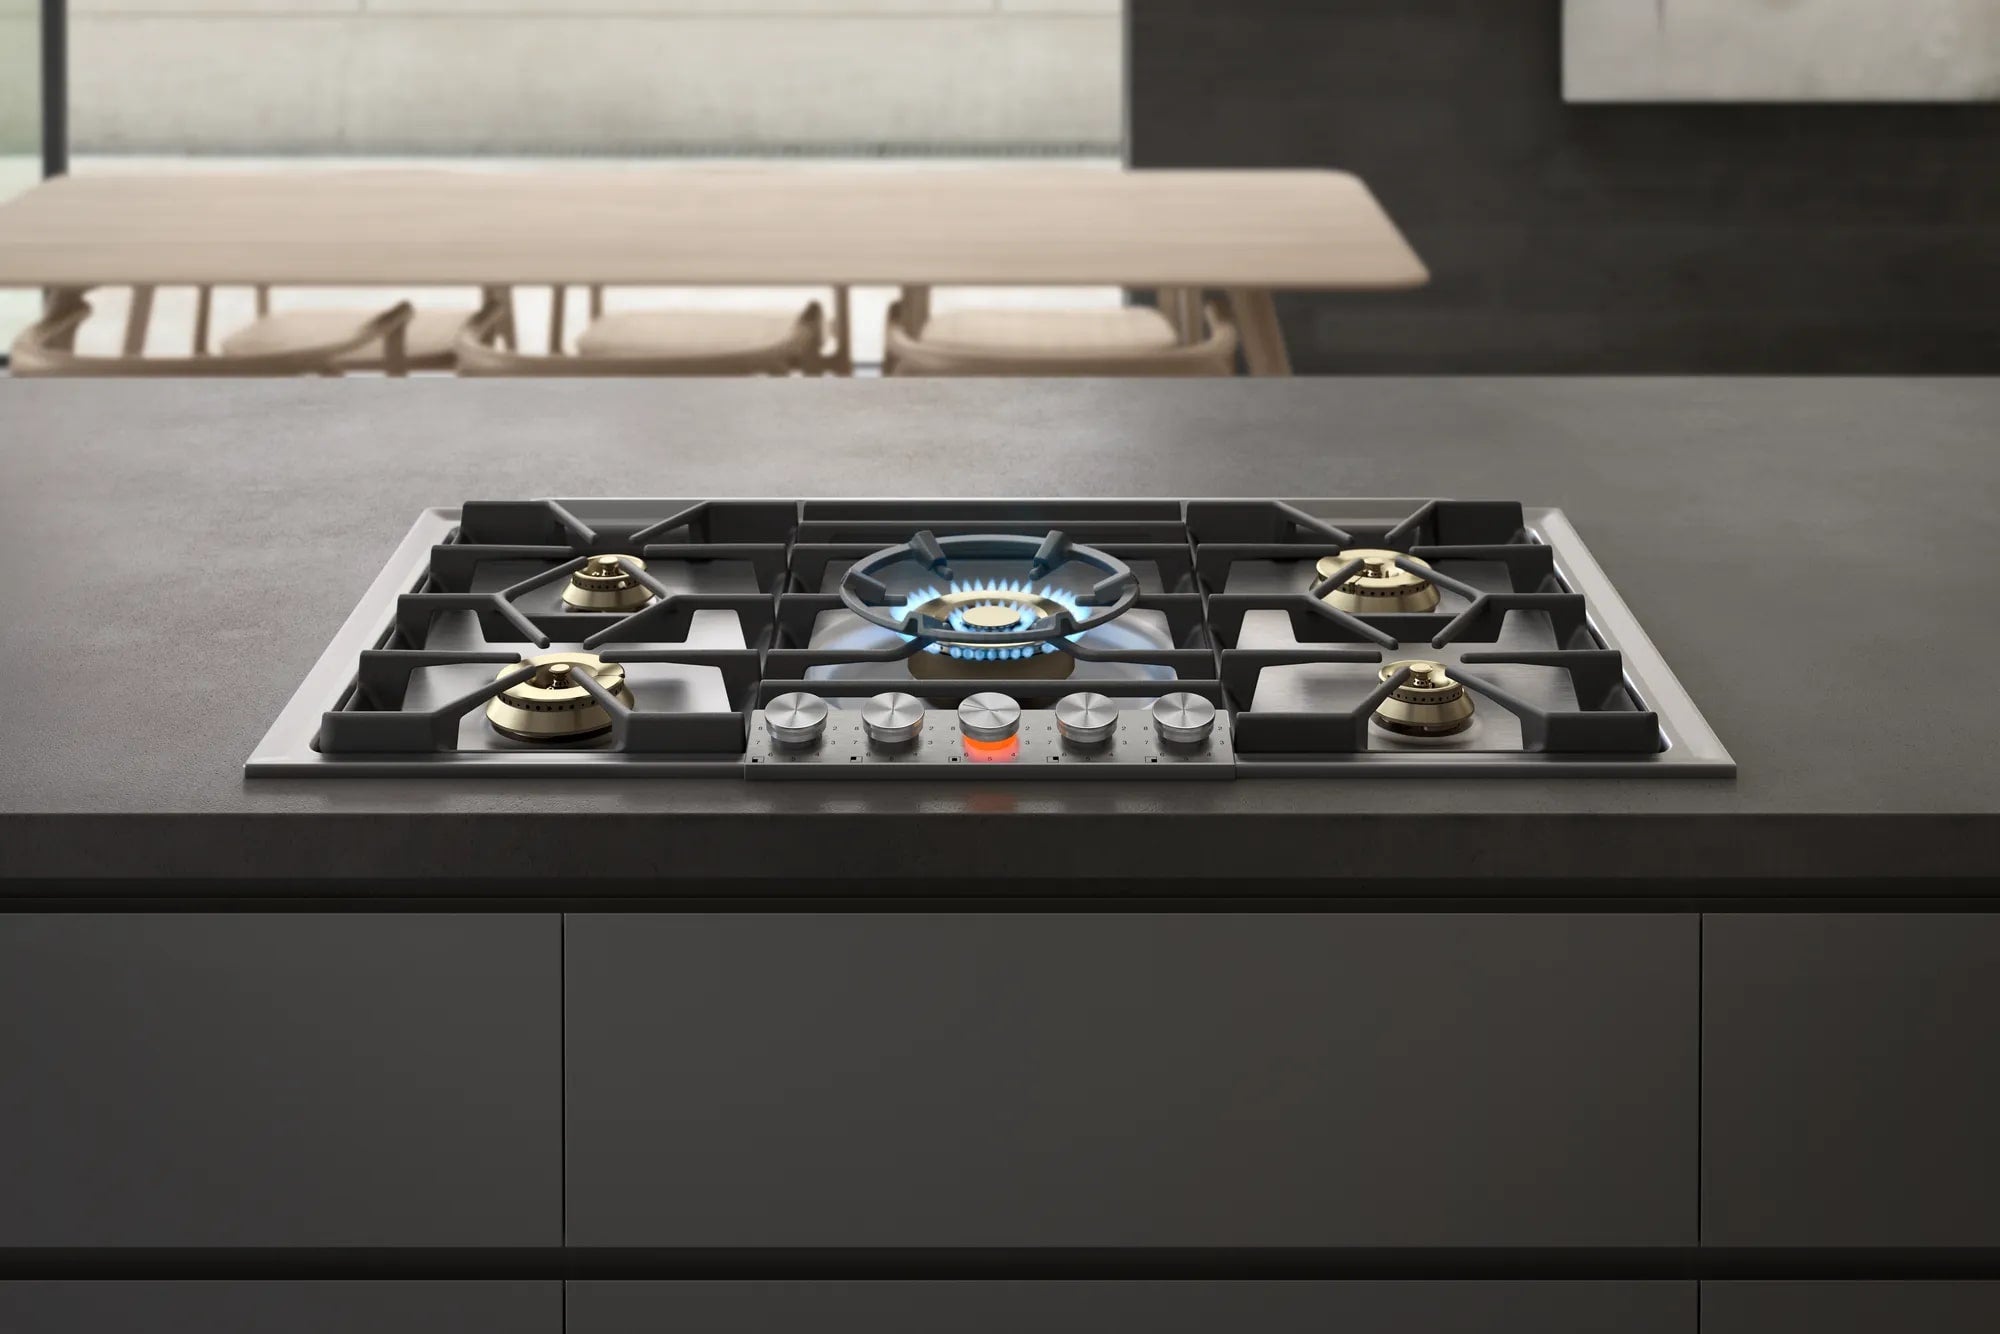 Gaggenau - 36 inch wide Gas Cooktop in Stainless - VG295250CA